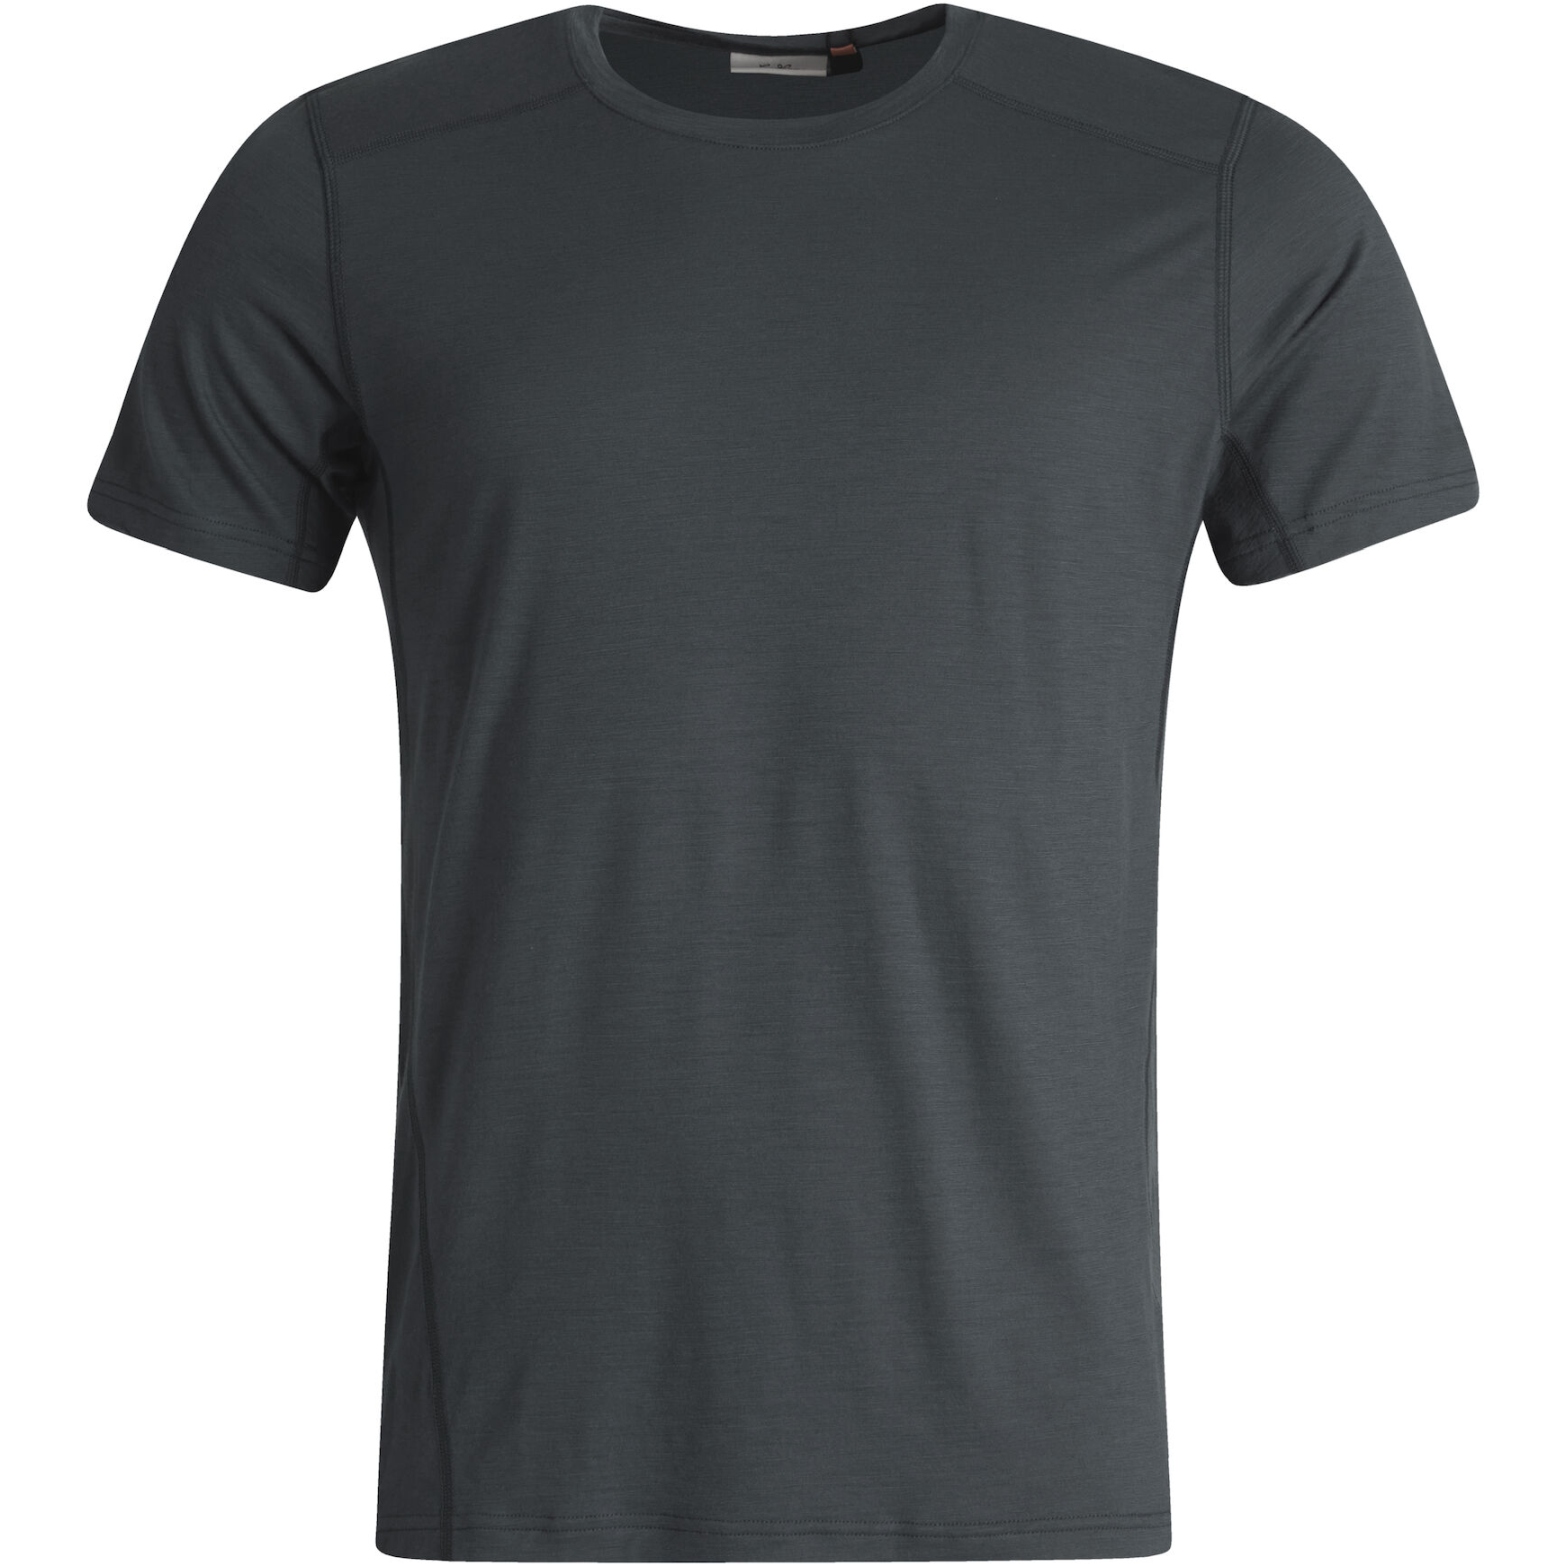 Picture of Lundhags Gimmer Merino Light Tee - Dark Agave 656